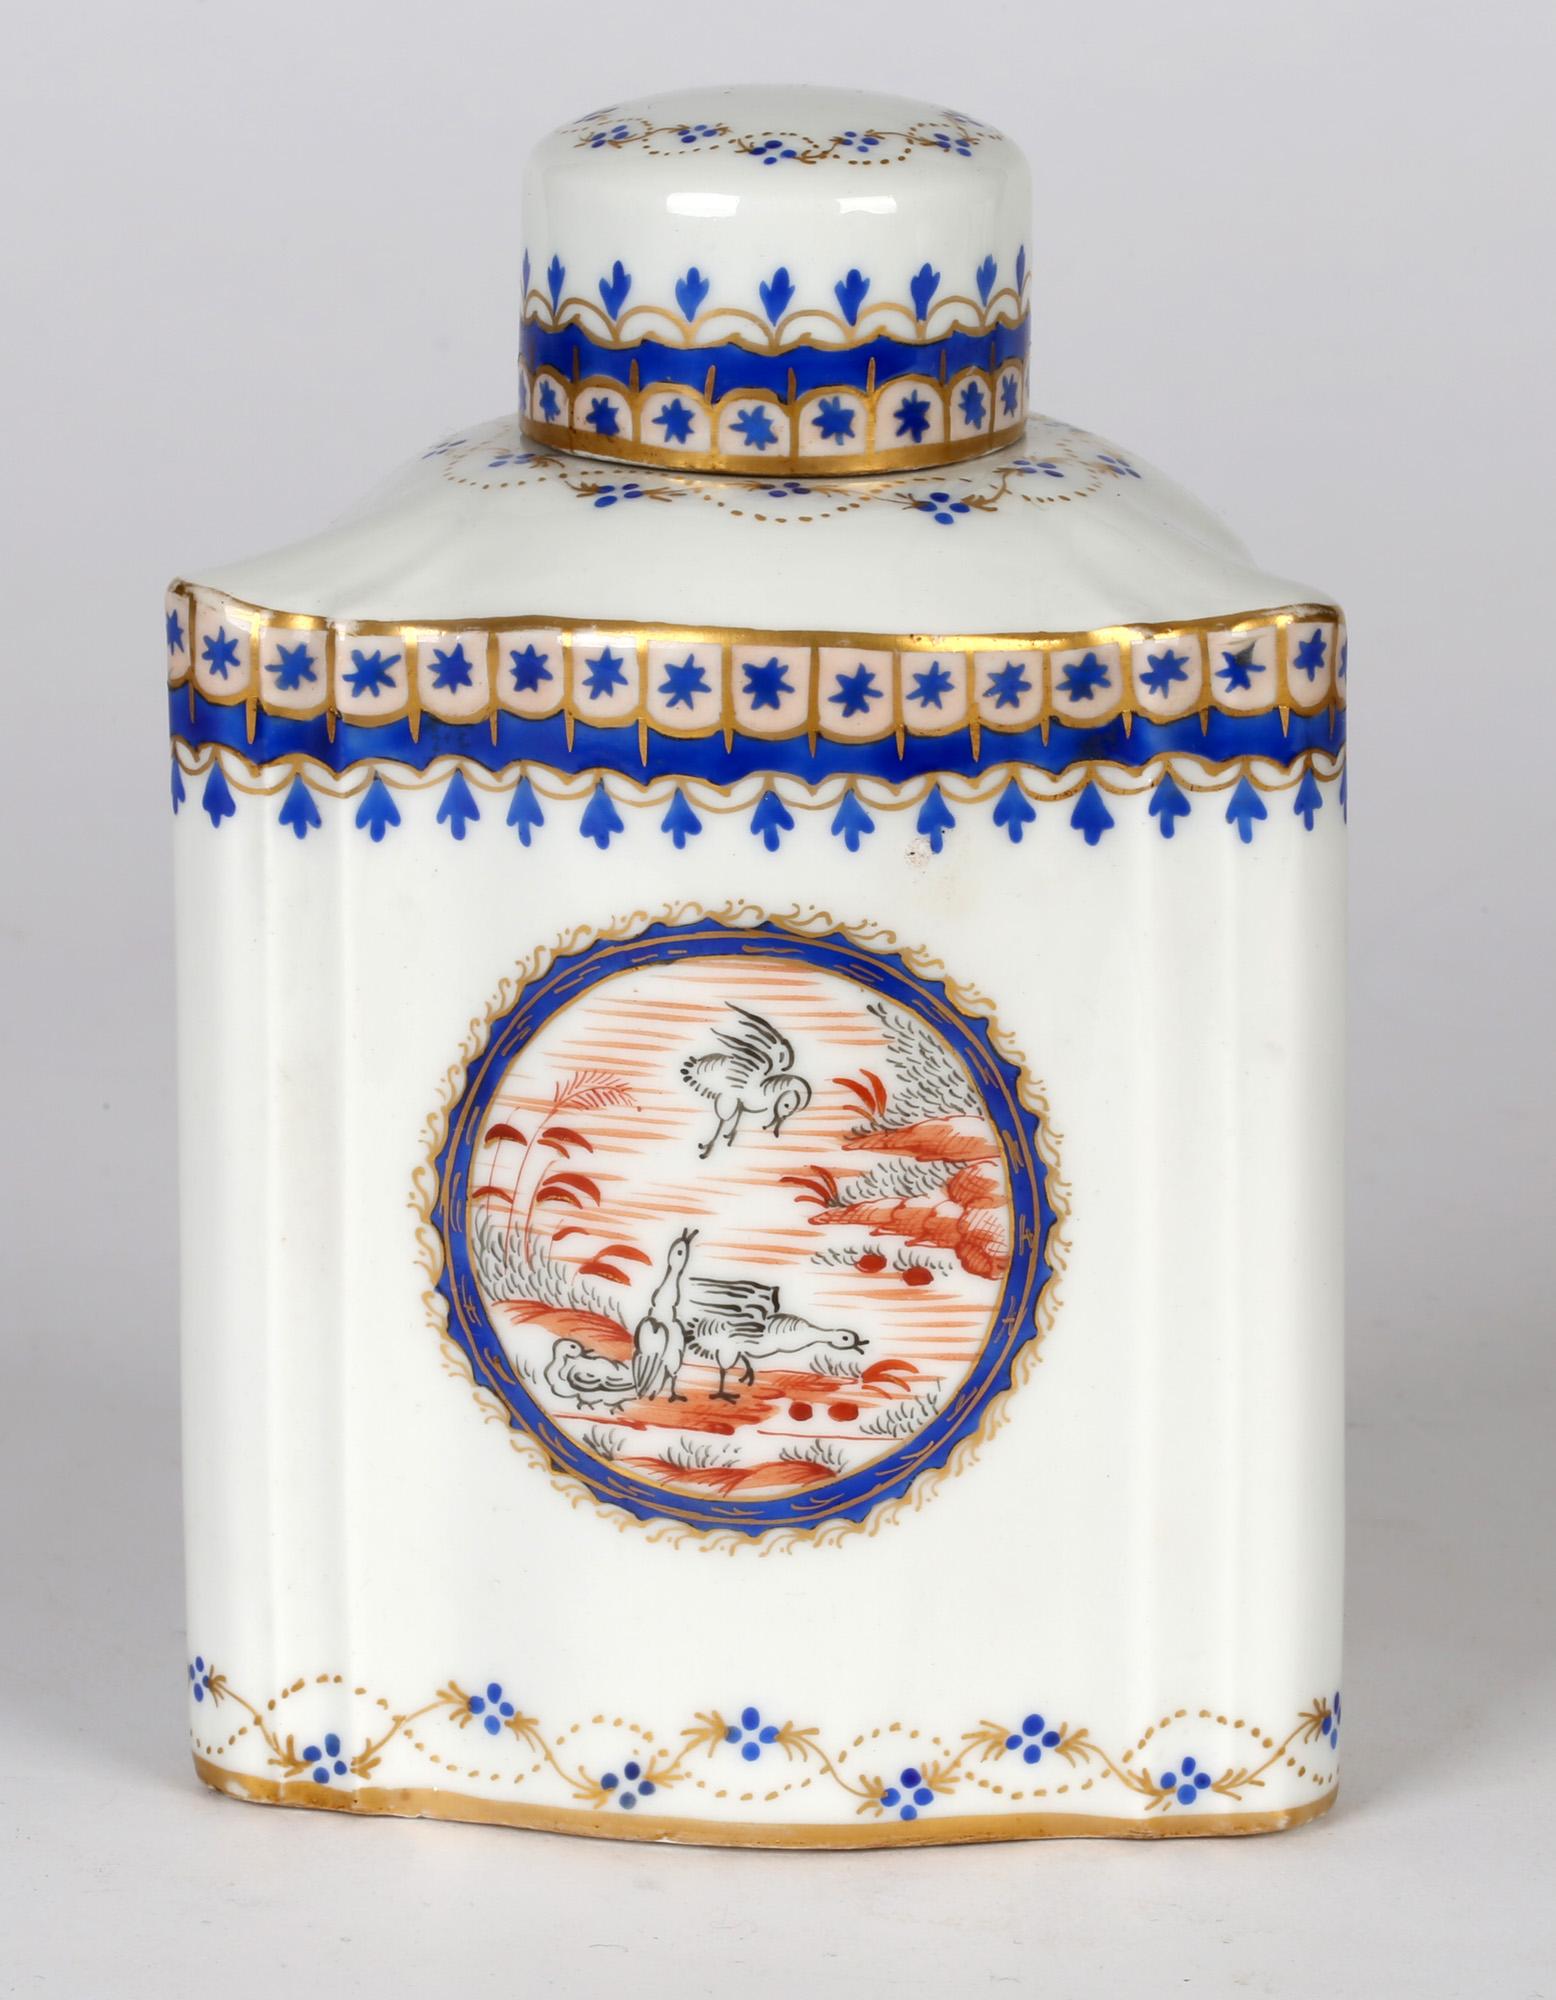 Samson French Porcelain Chinese Style Triangular Lidded Teacaddy In Good Condition For Sale In Bishop's Stortford, Hertfordshire